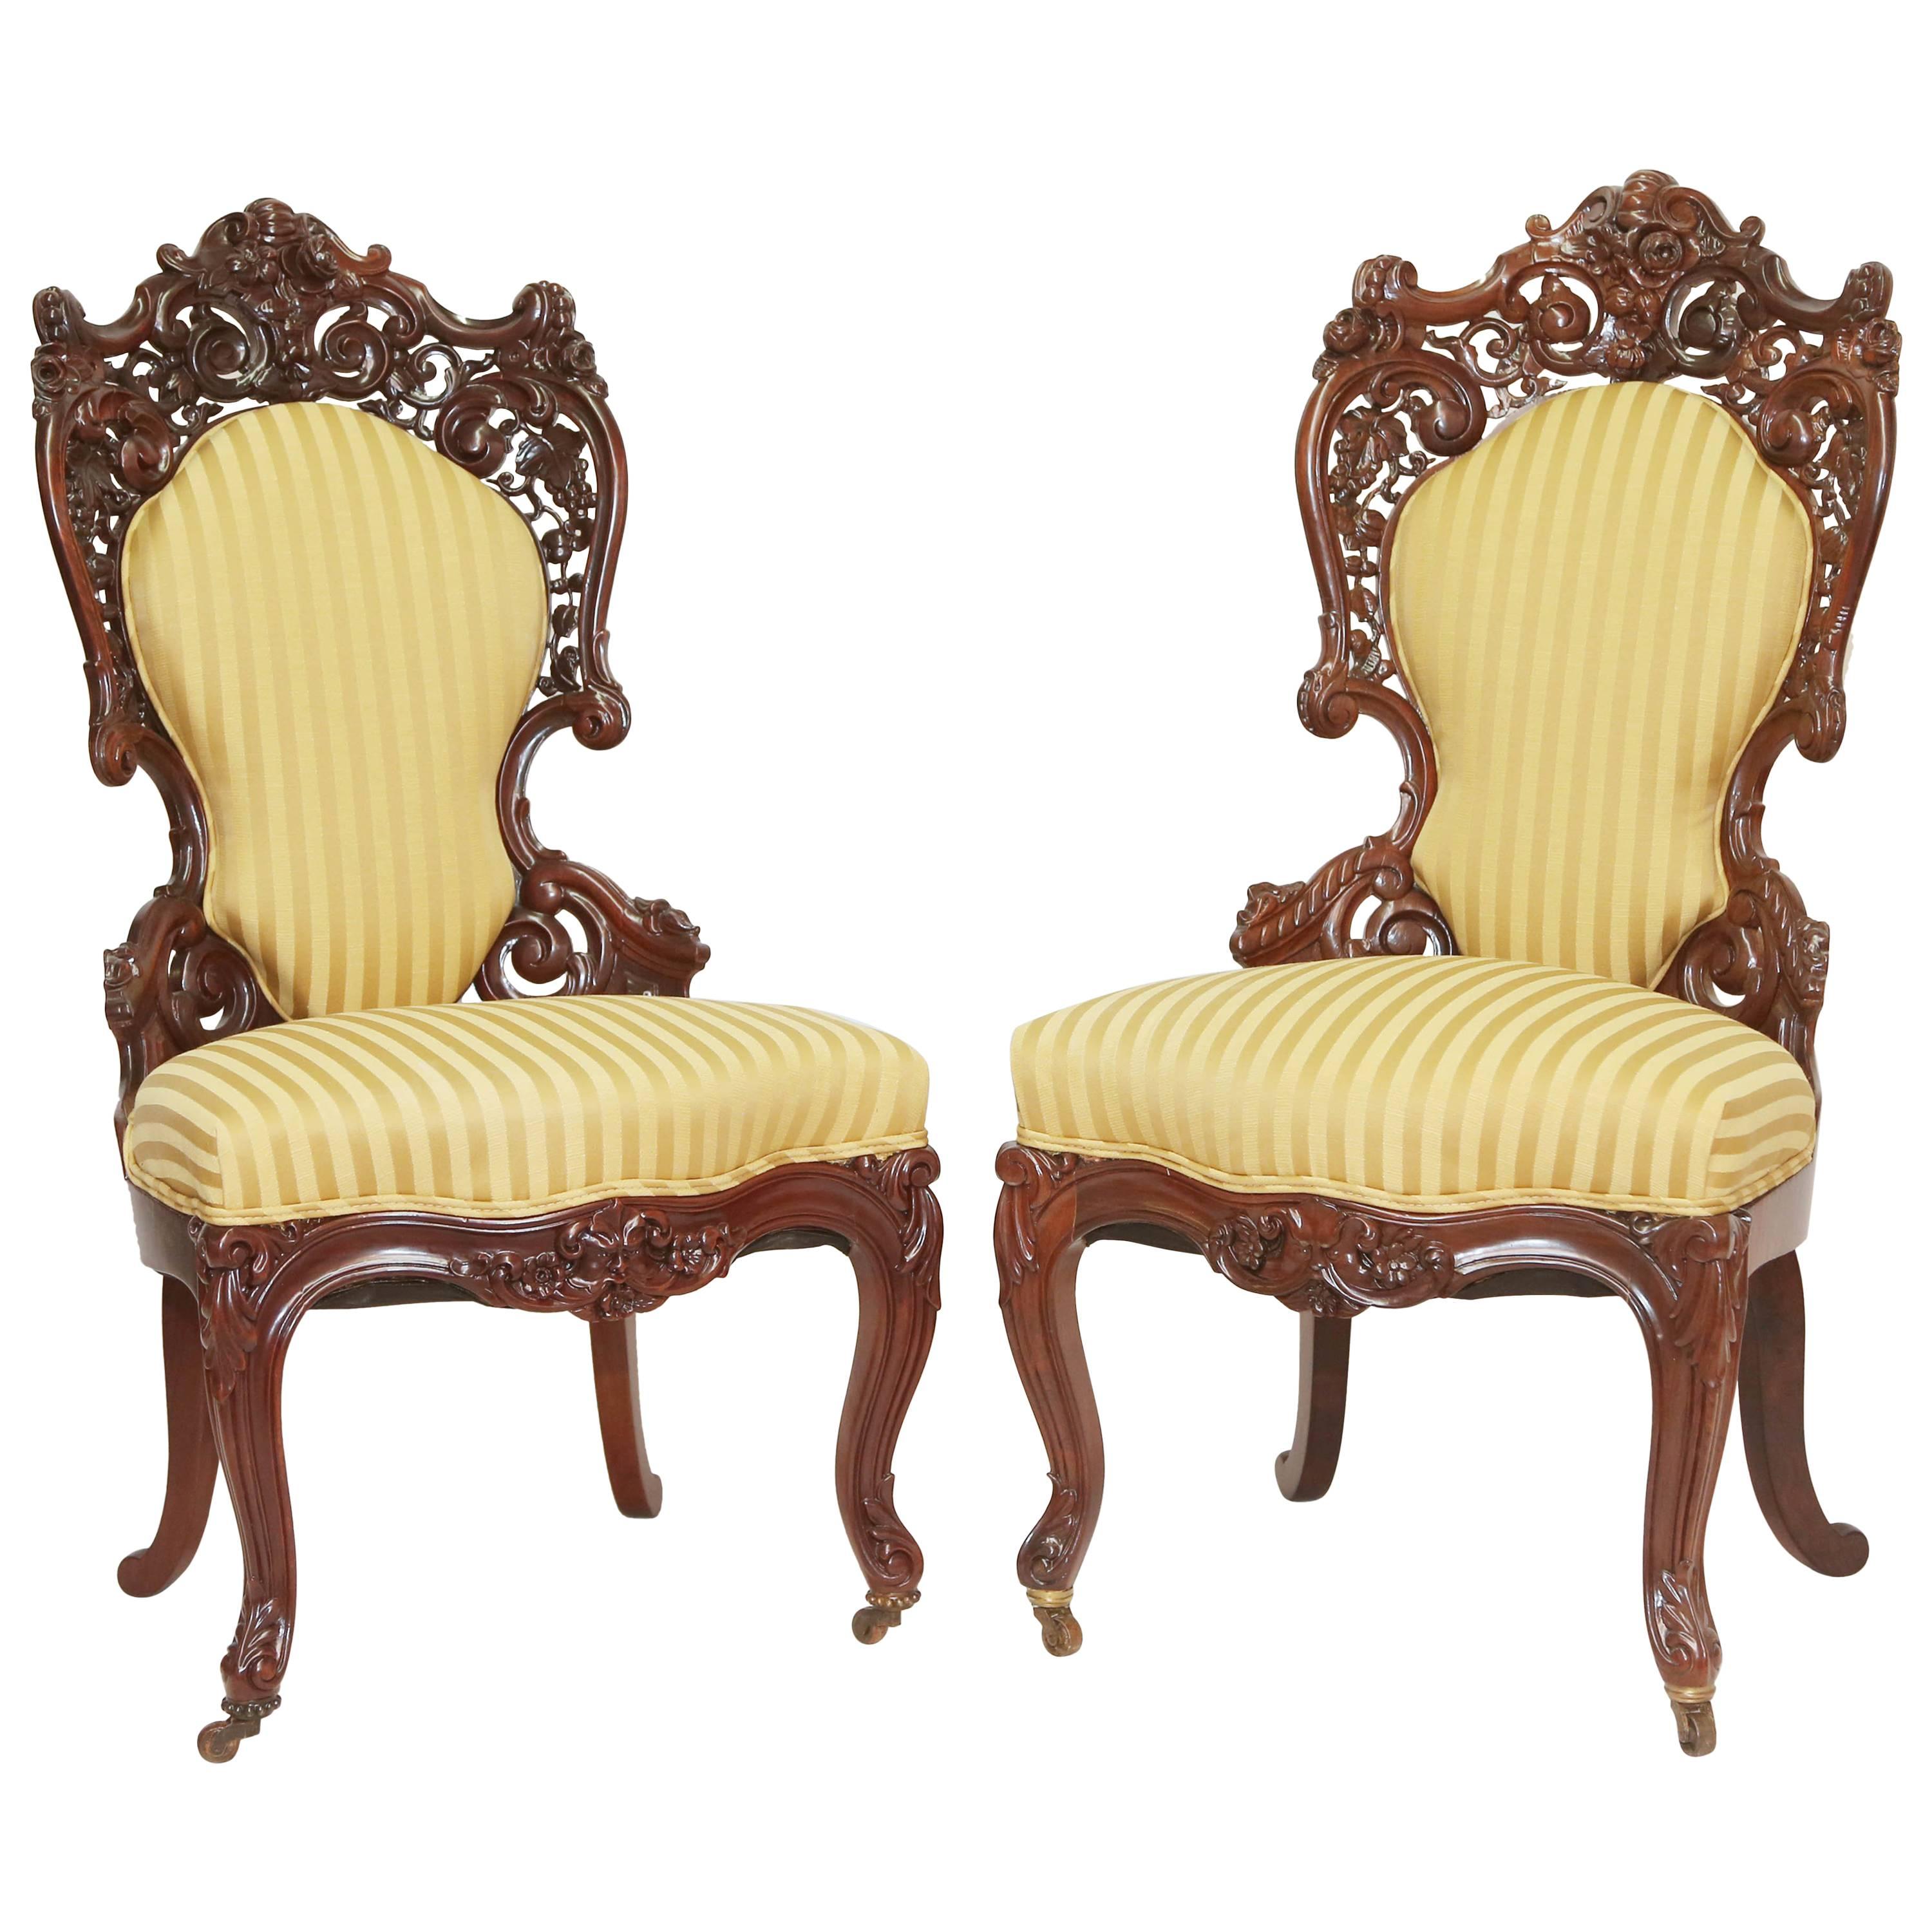 Superb Pair of English 19th century Belter Style Rosewood Victorian Chairs